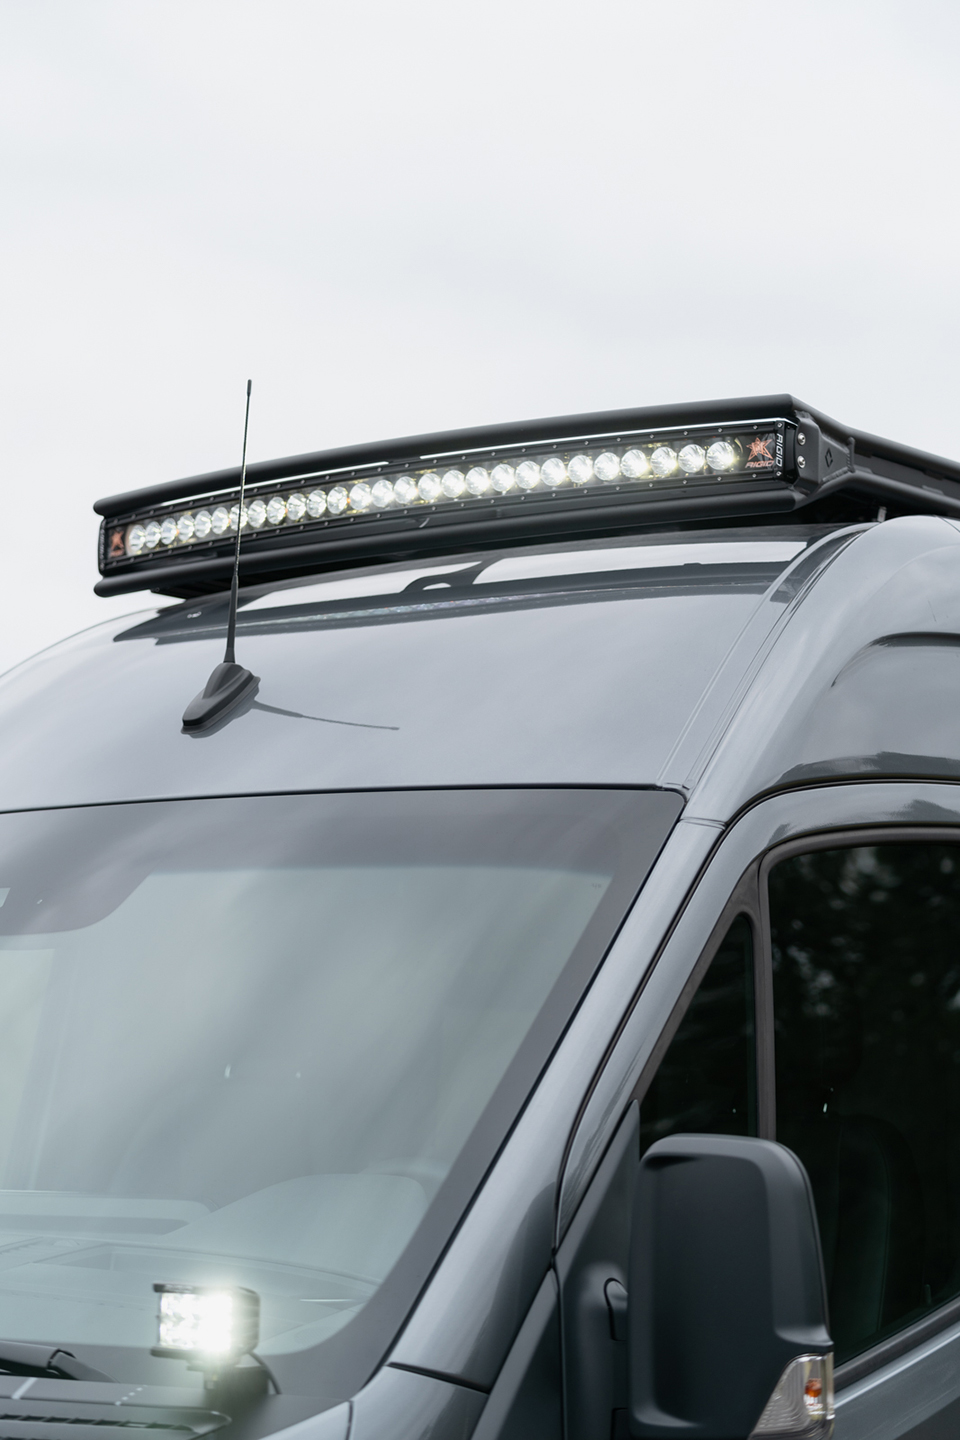 Rigid Industries 50 inch lightbar and mounted ditch lights